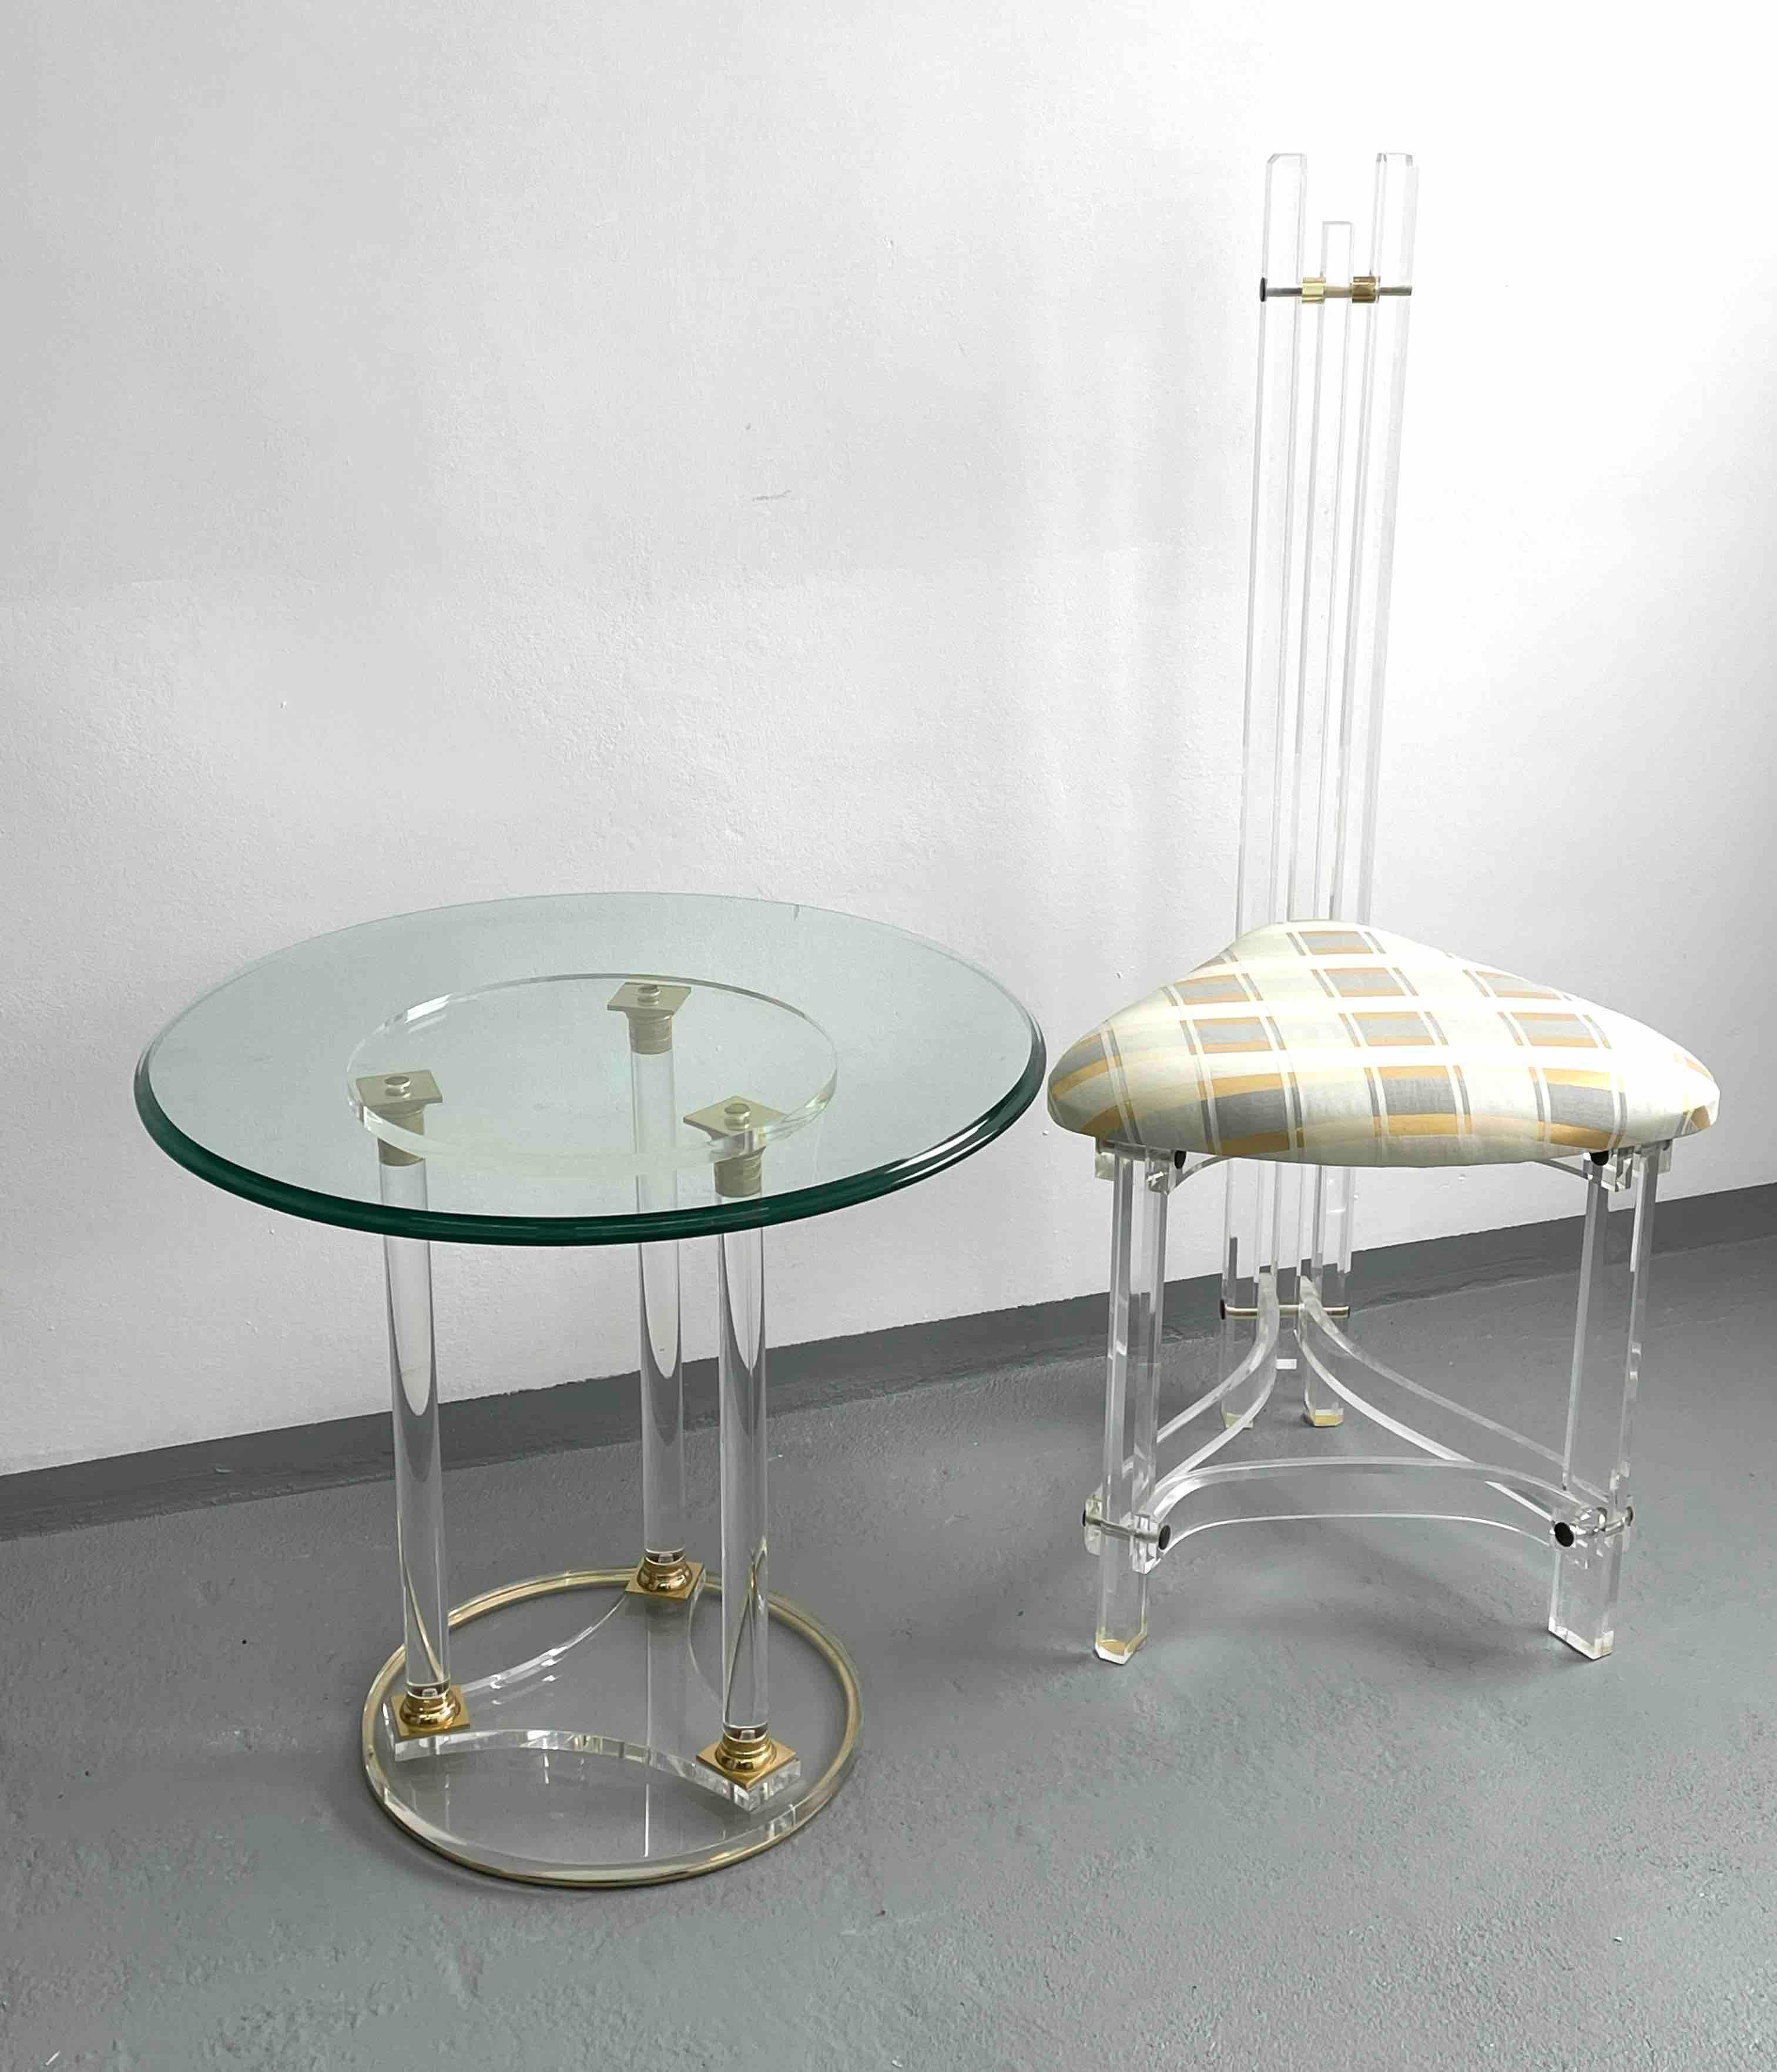 Modern Lucite Telephone Table and Chair Hallway Waiting Area Set, Germany 1980s For Sale